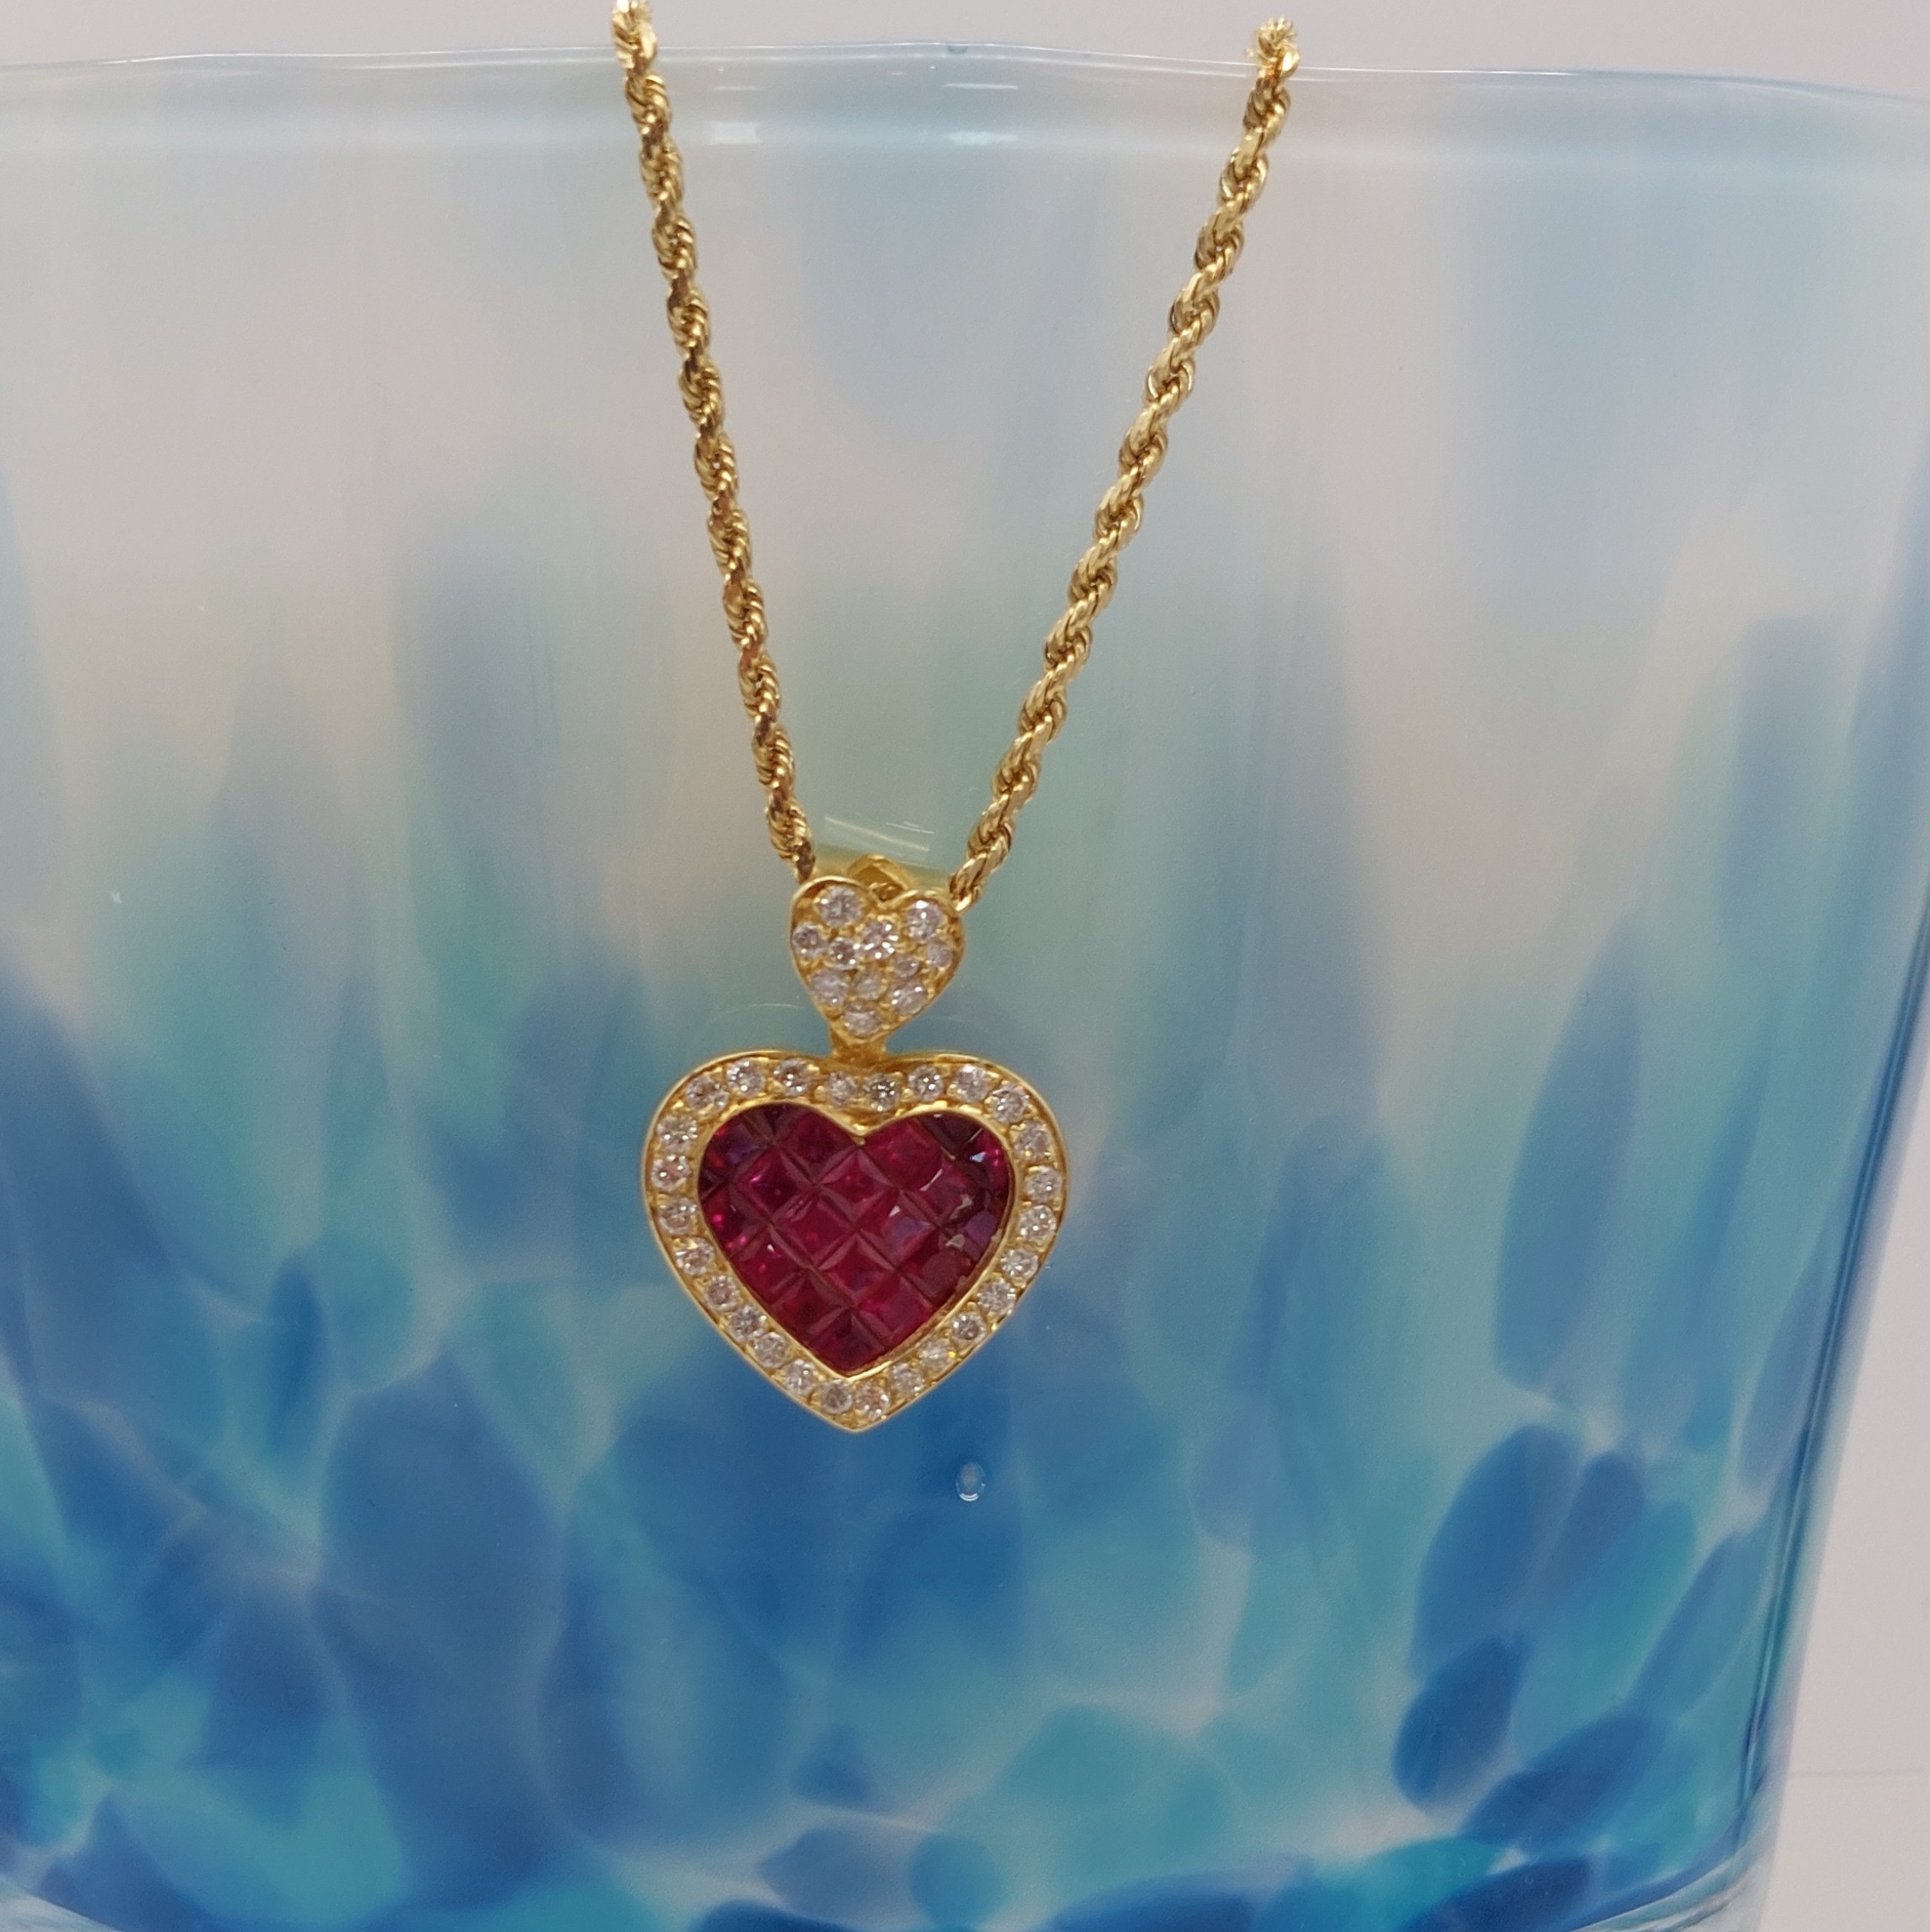 Jewelili Heart Necklace Ruby Jewelry in Yellow Gold Over Sterling Silver